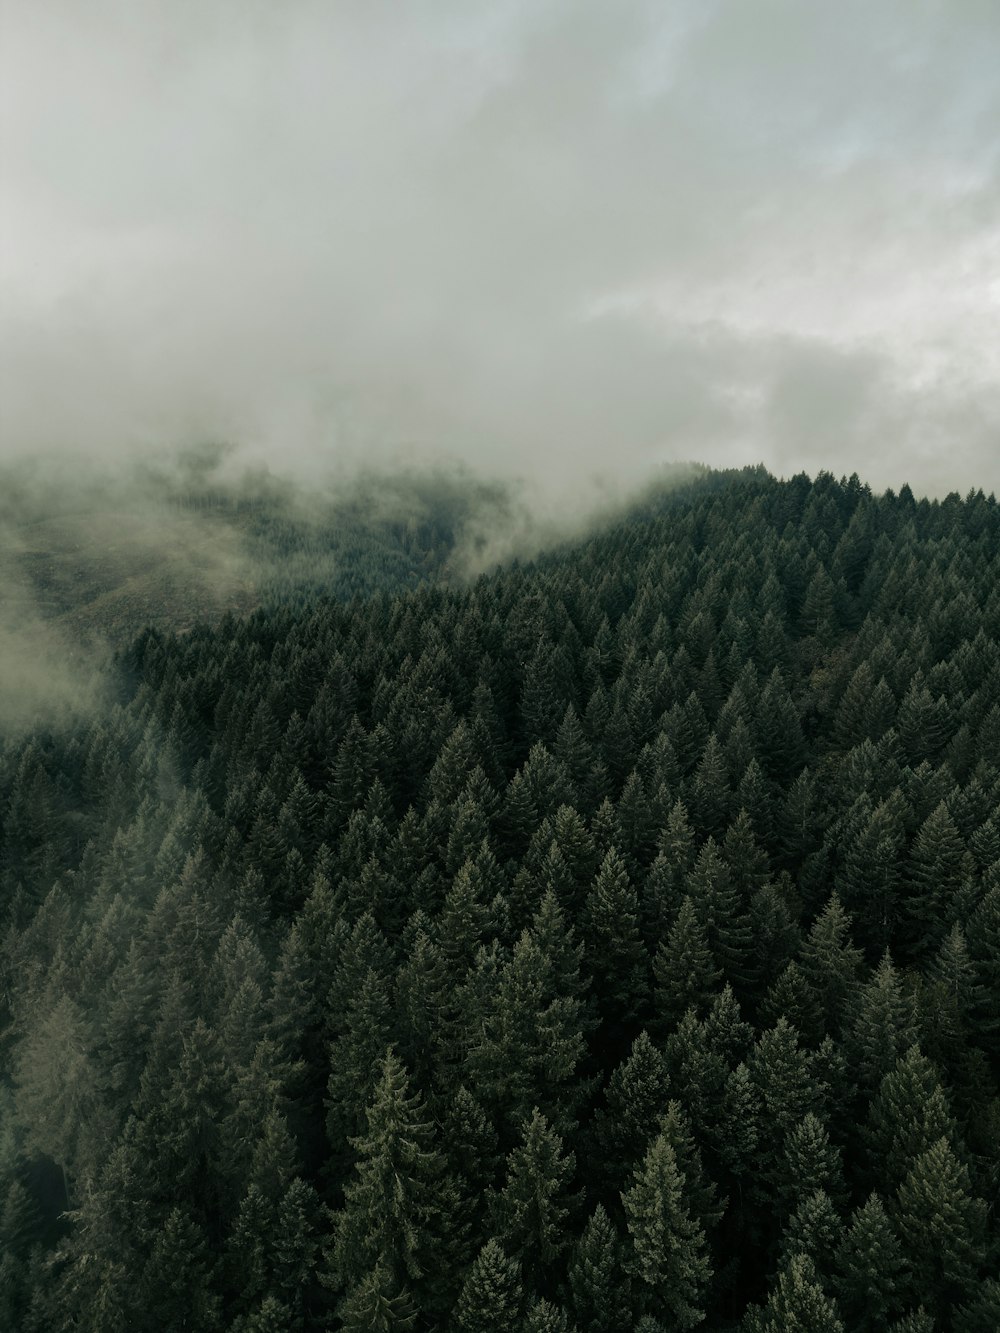 a forest covered in lots of trees under a cloudy sky